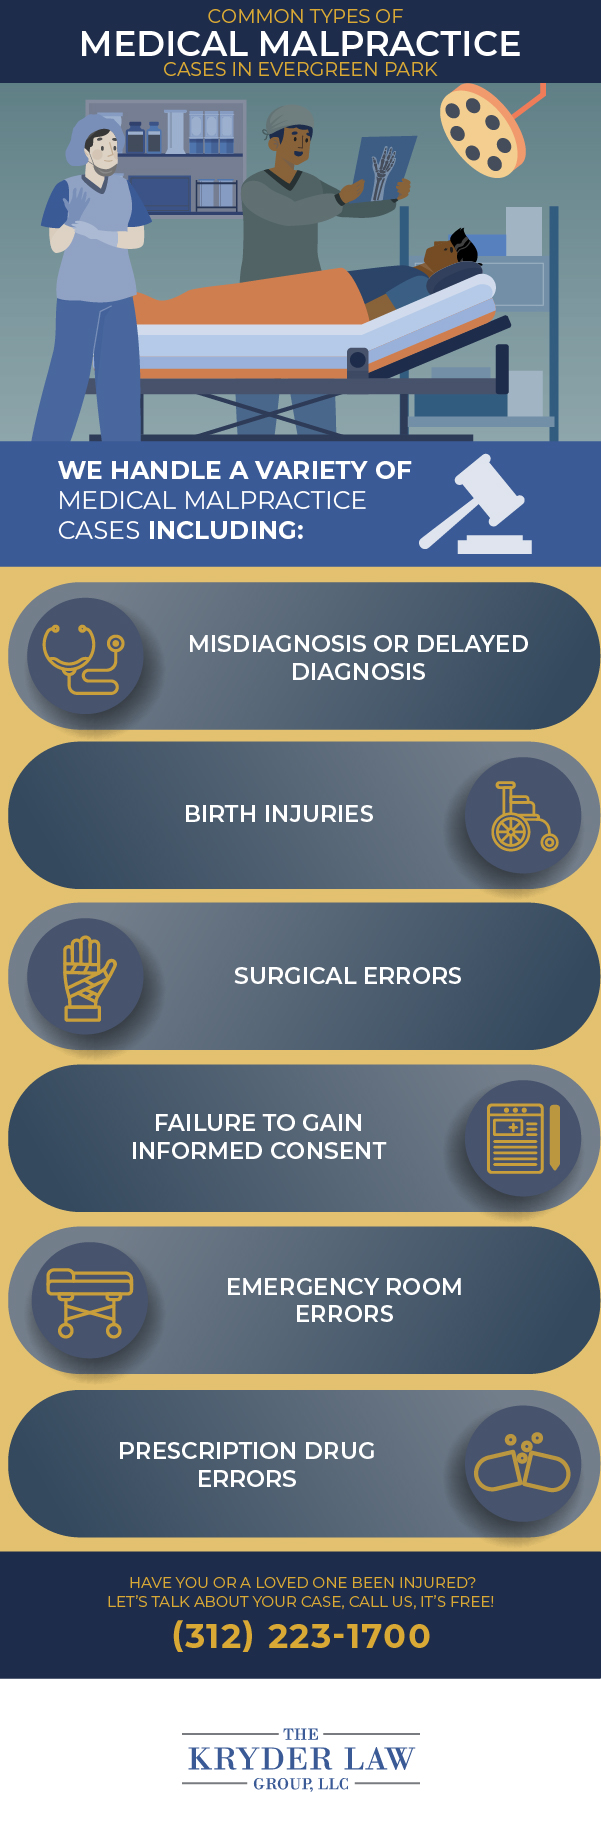 Common Types of Medical Malpractice Cases in Evergreen Park